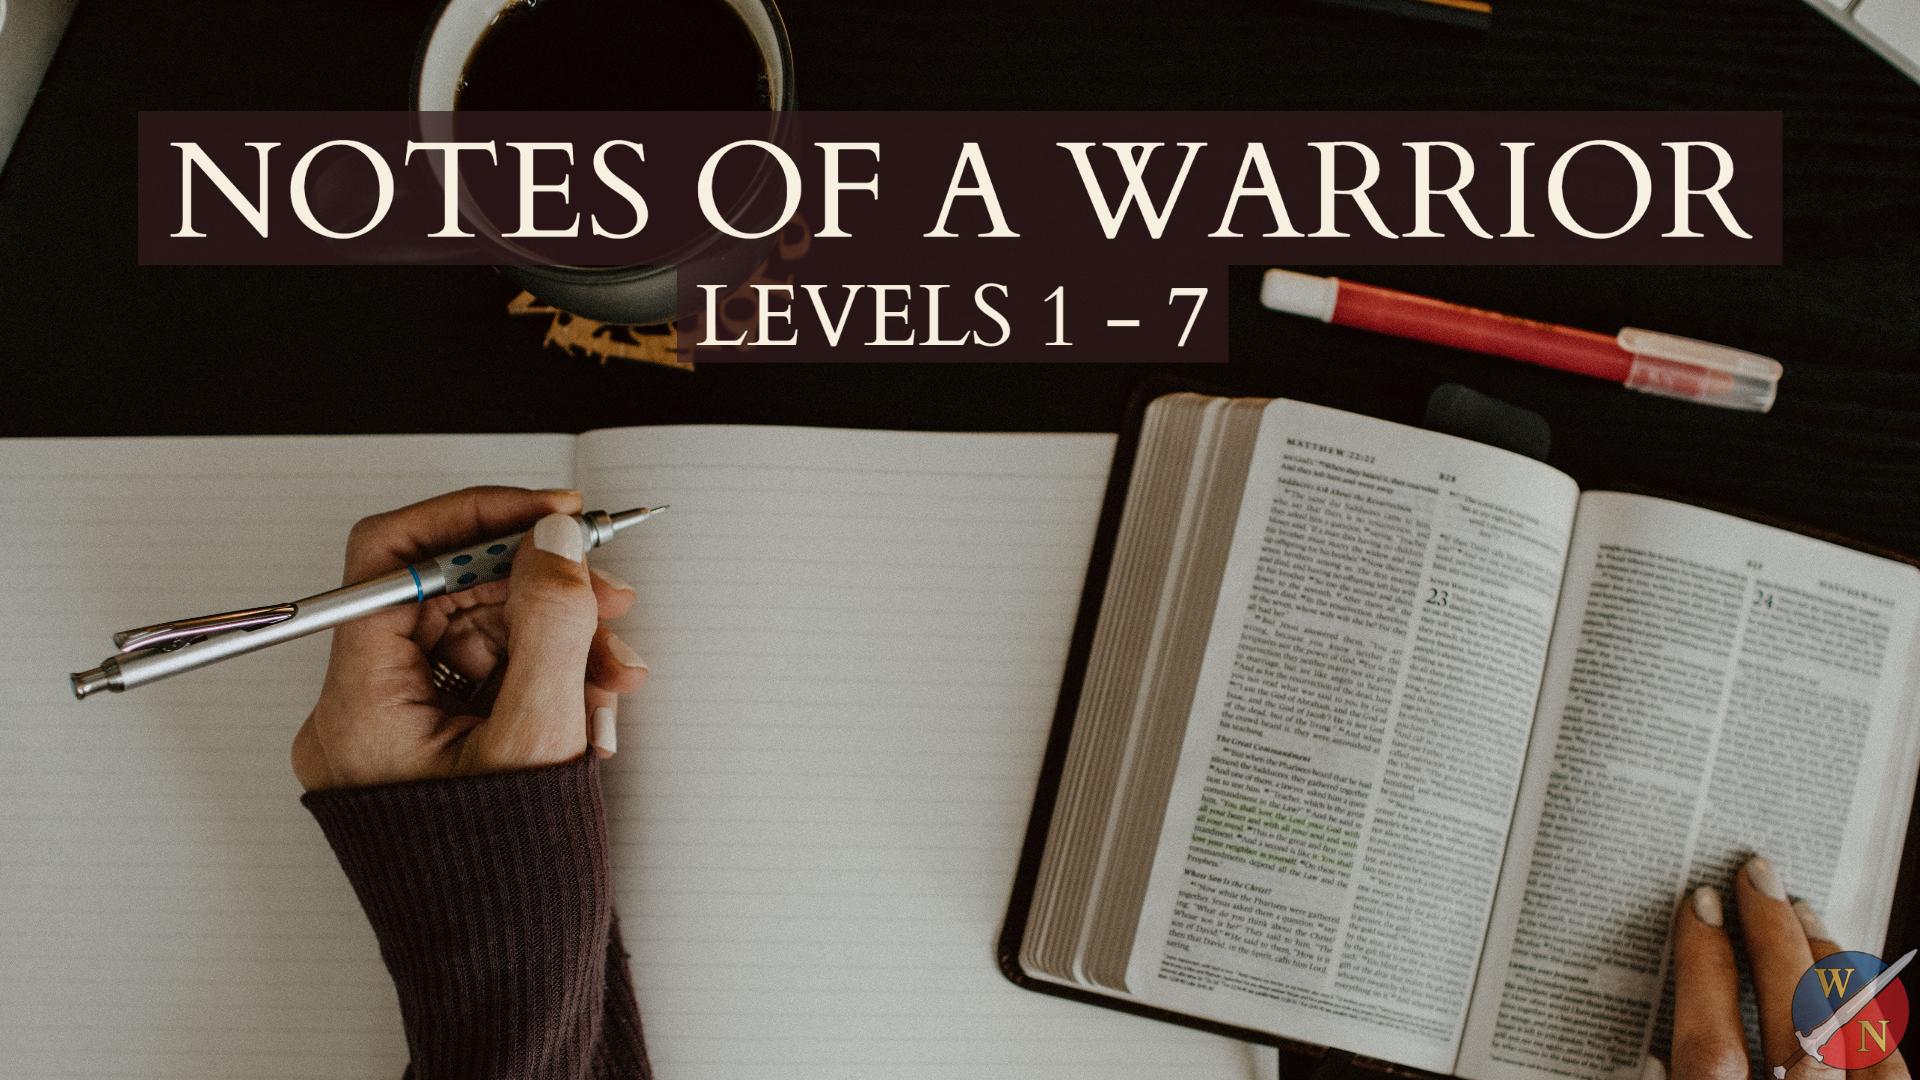 Notes of a Warrior bundle with Dr. Kevin Zadai